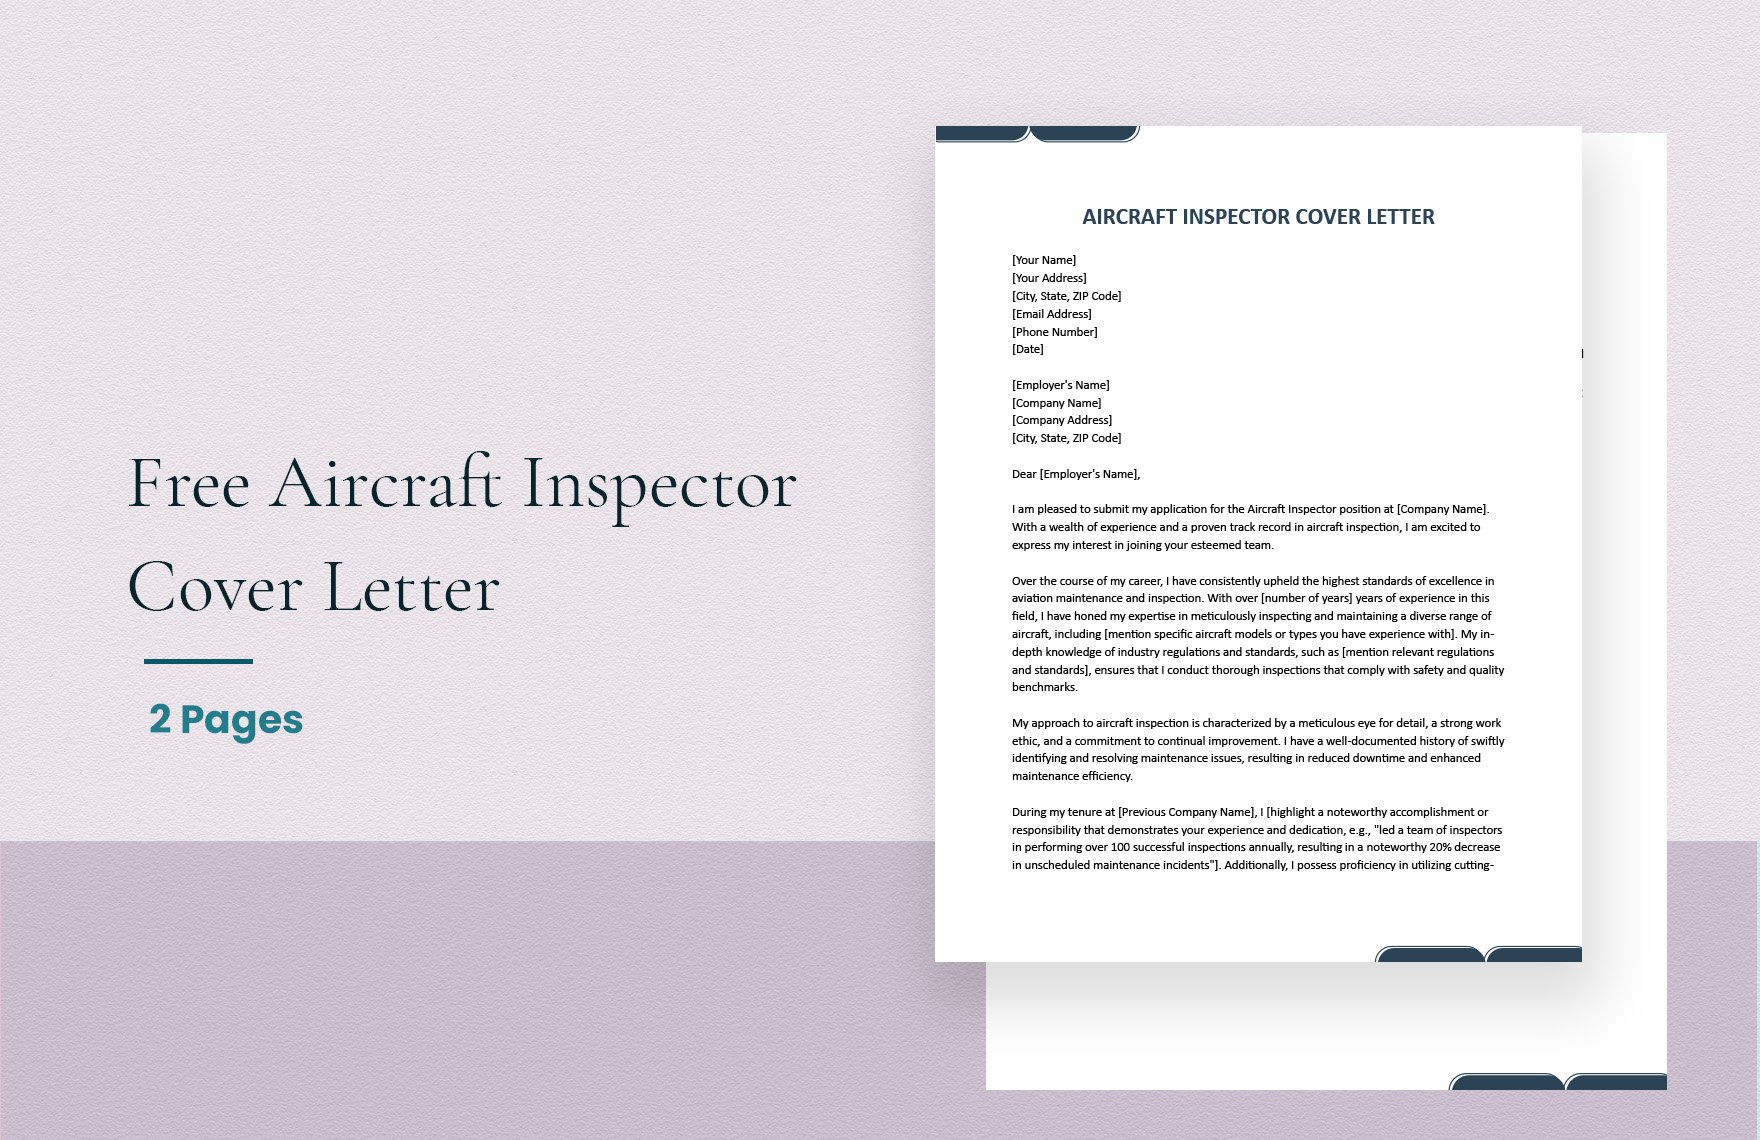 Aircraft Inspector Cover Letter in Word, Google Docs